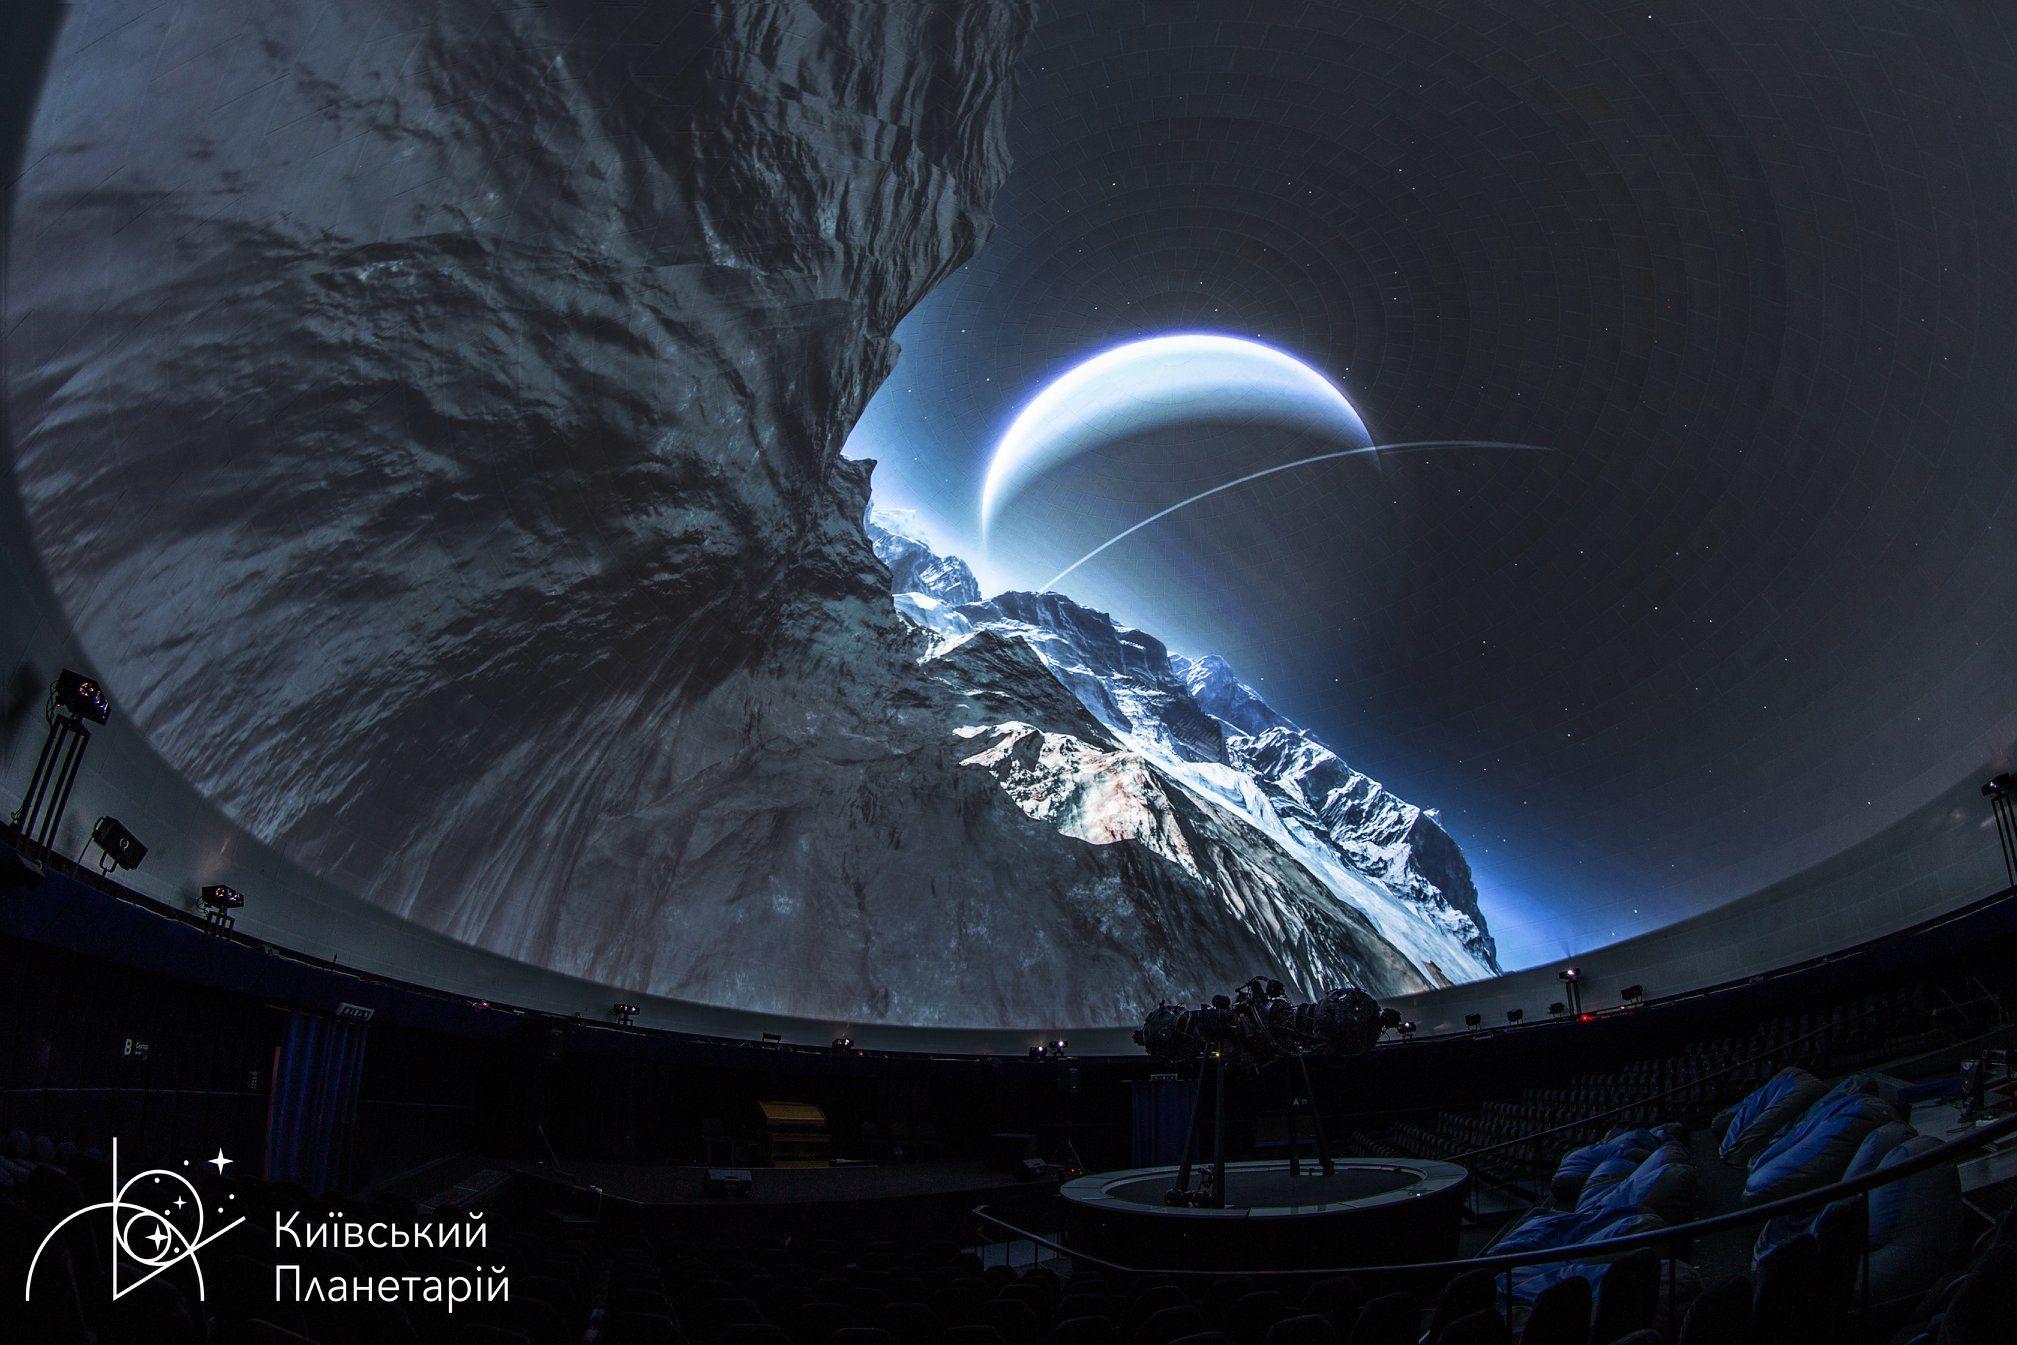 Screenberry-driven fulldome projection at Kyiv Planetarium, illustrating Screenberry's super high-resolution video playback capabilities